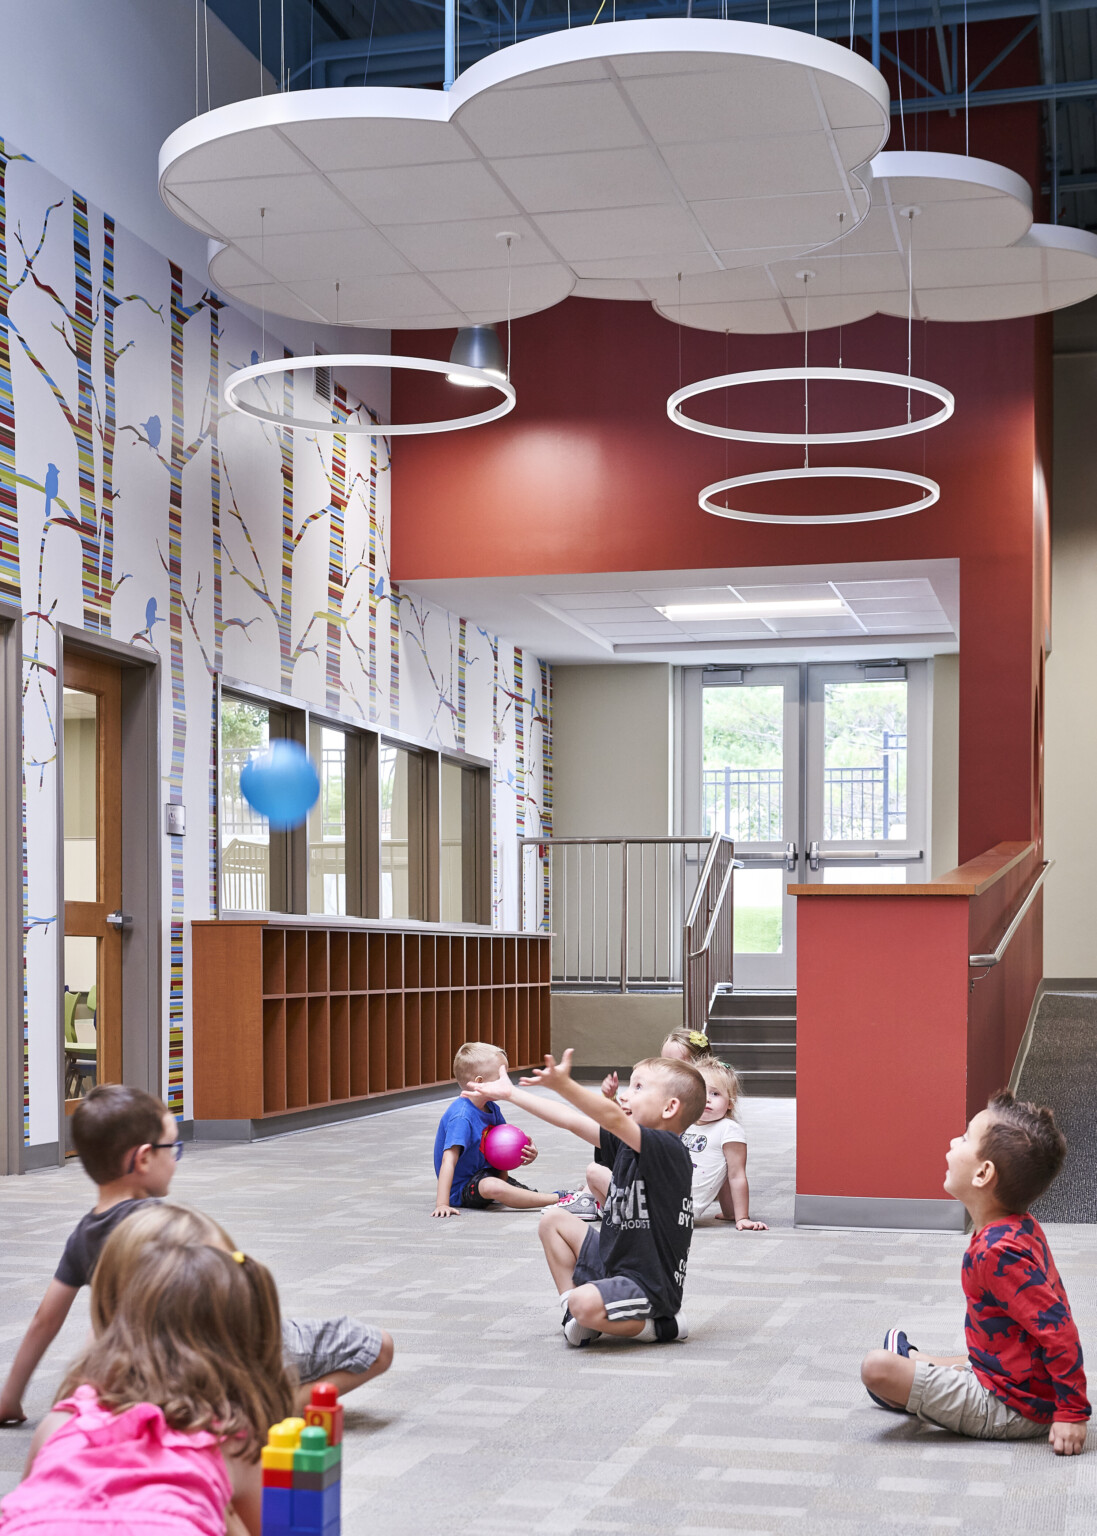 Red hallway with colorful striped tree mural on white wall, left. Hanging cloud details and circular lights over children playing on carpet